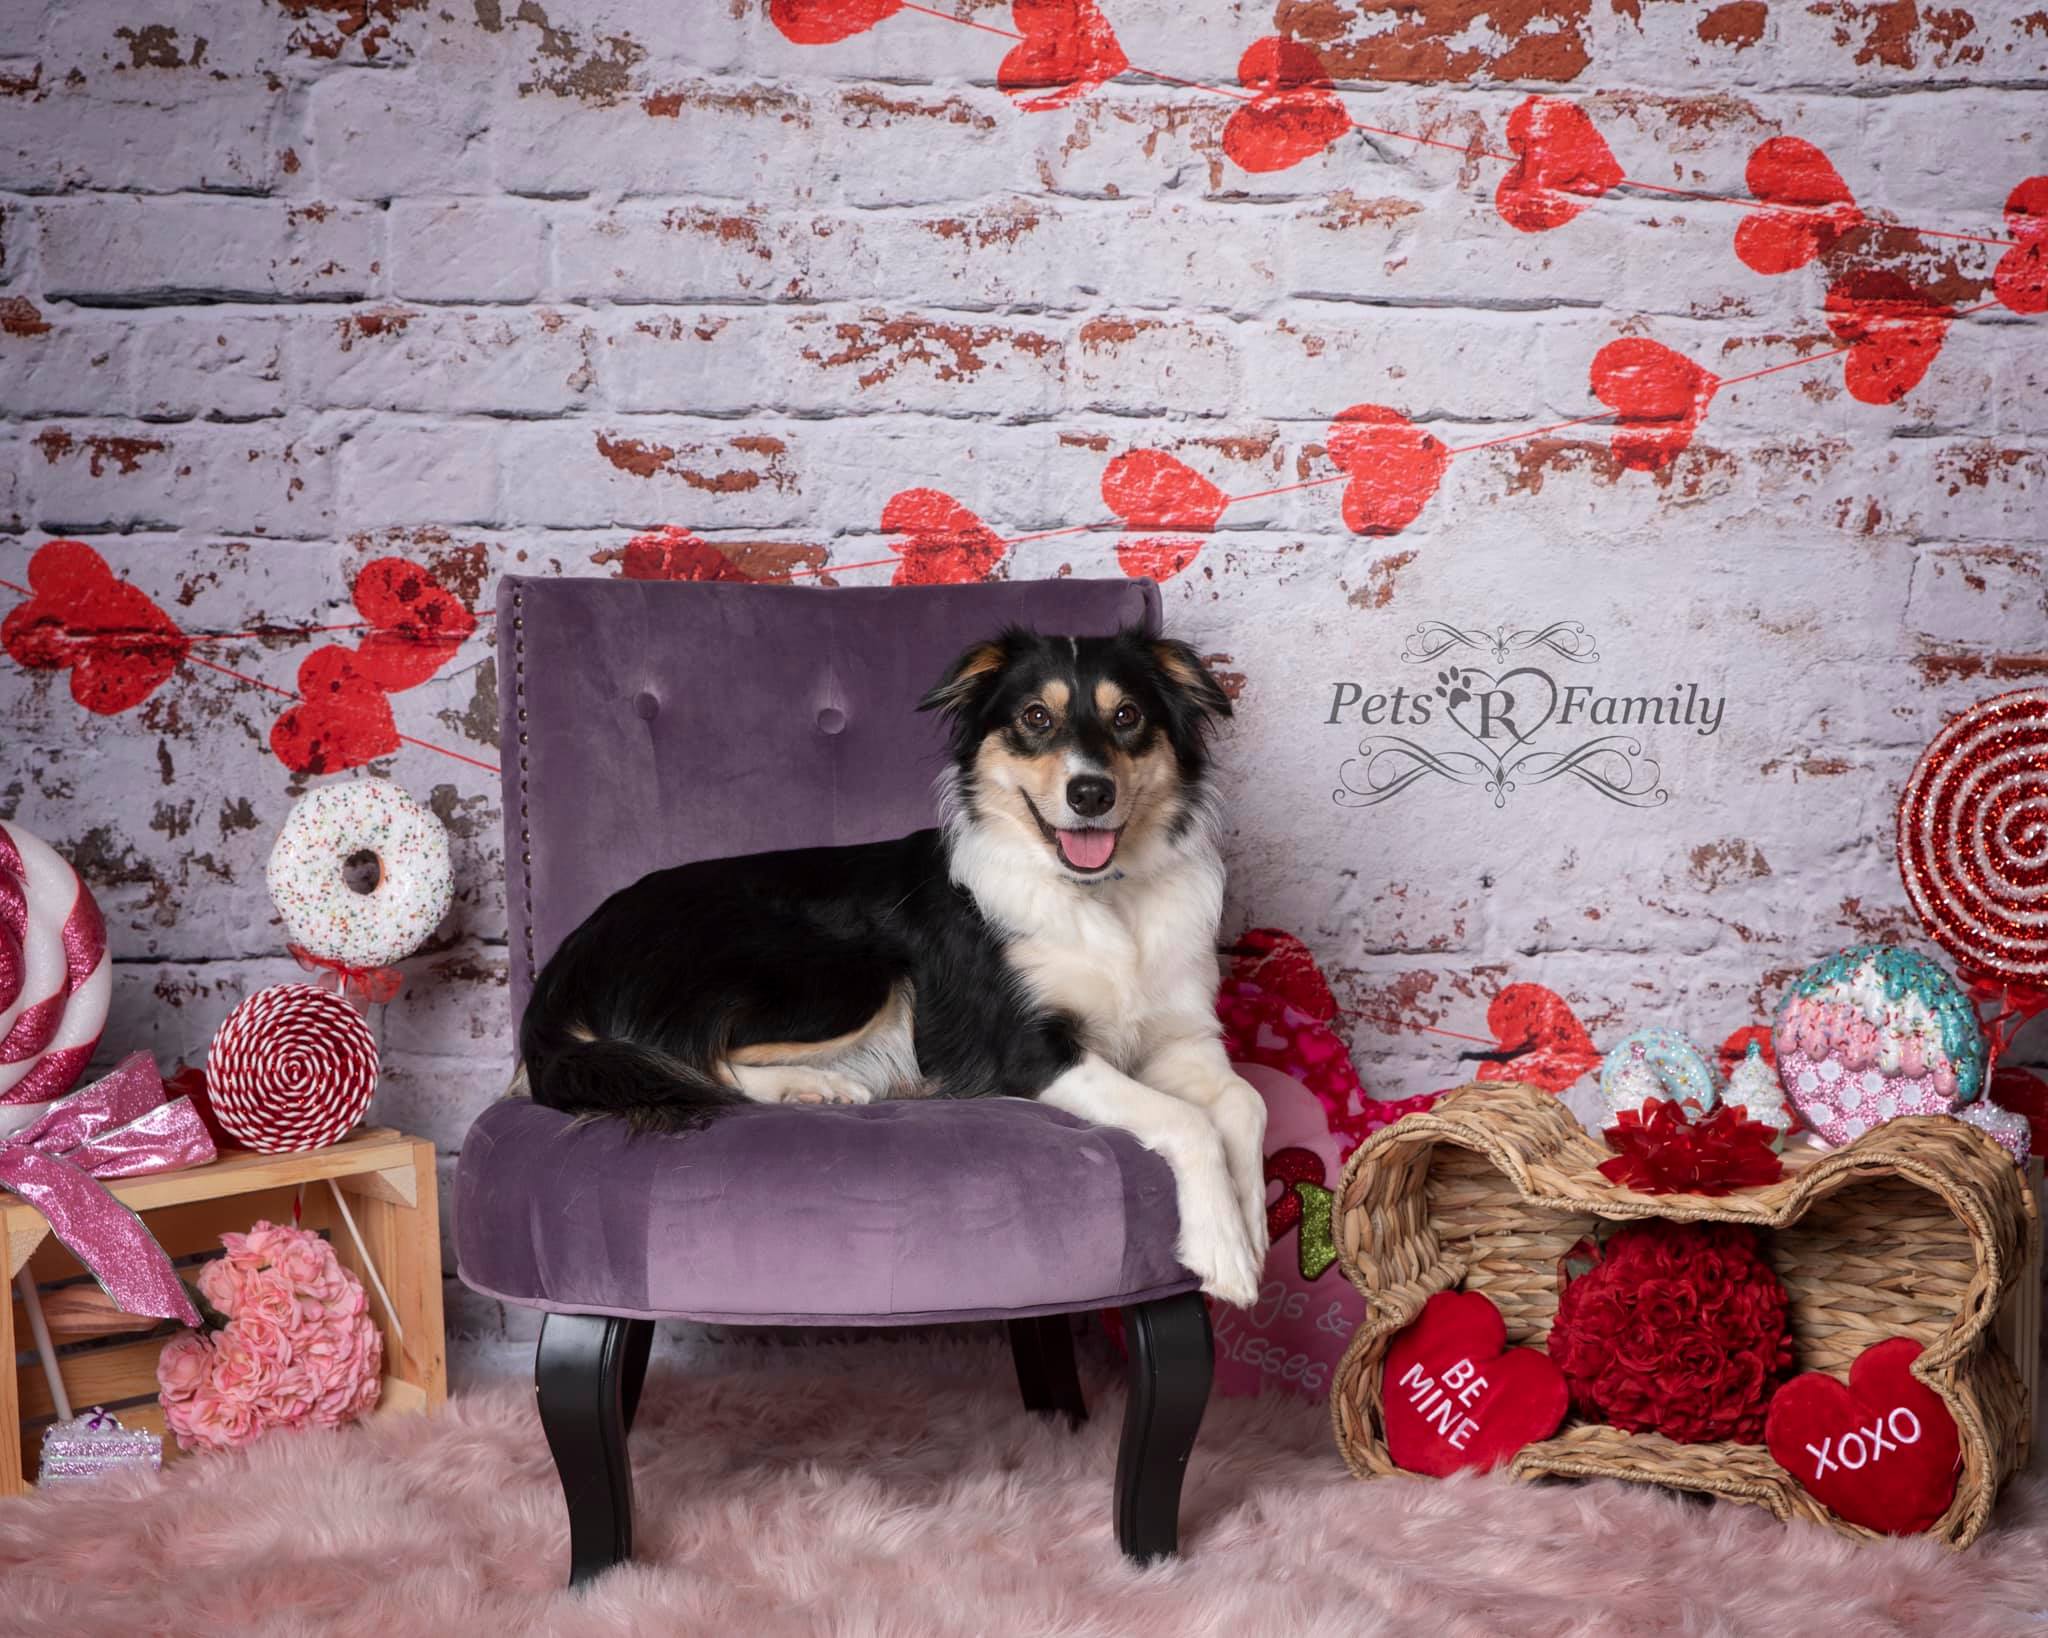 Kate white brick wall with red hearts Valentine's Day Backdrop for Photography designed by Jerry_Sina